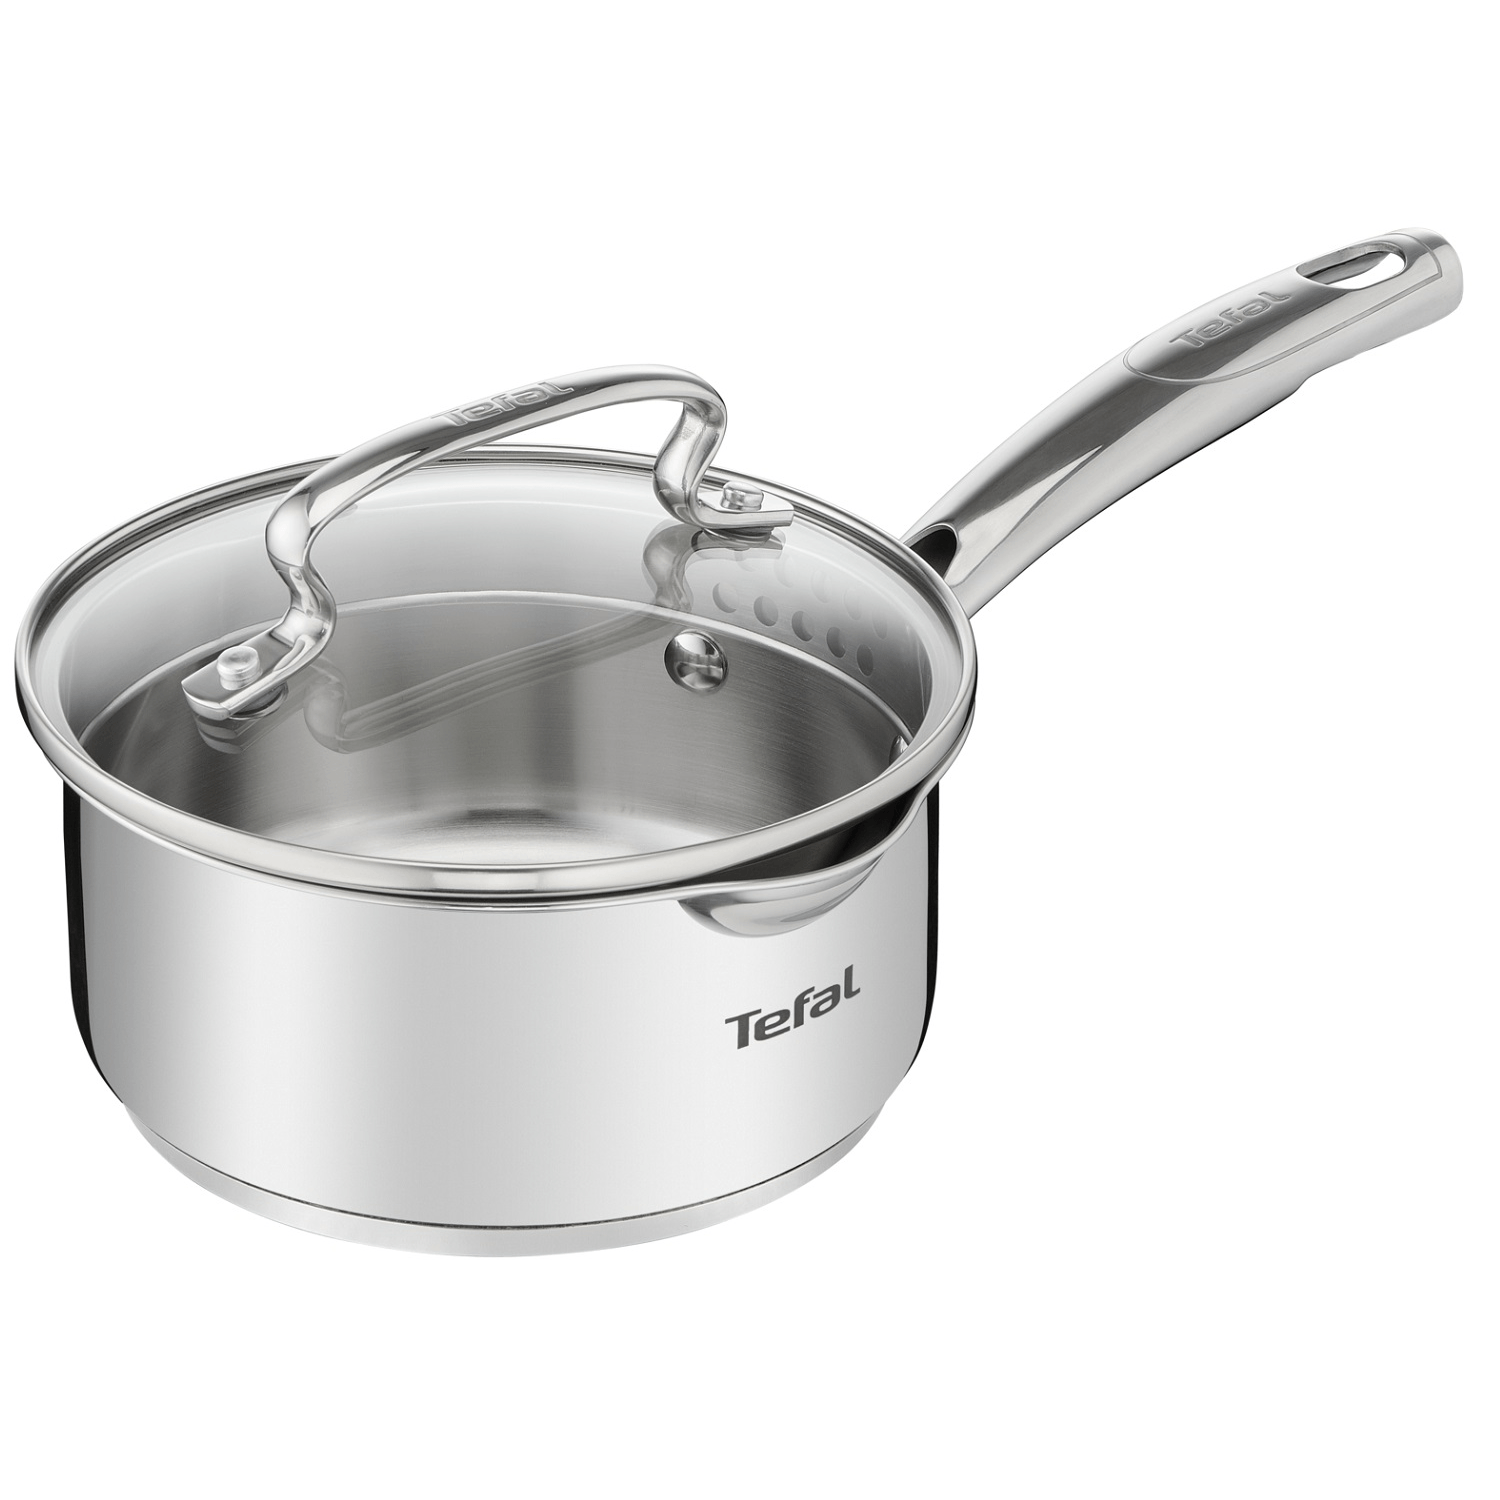 TEFAL Olla 24 Cm Con Tapa So Recycled